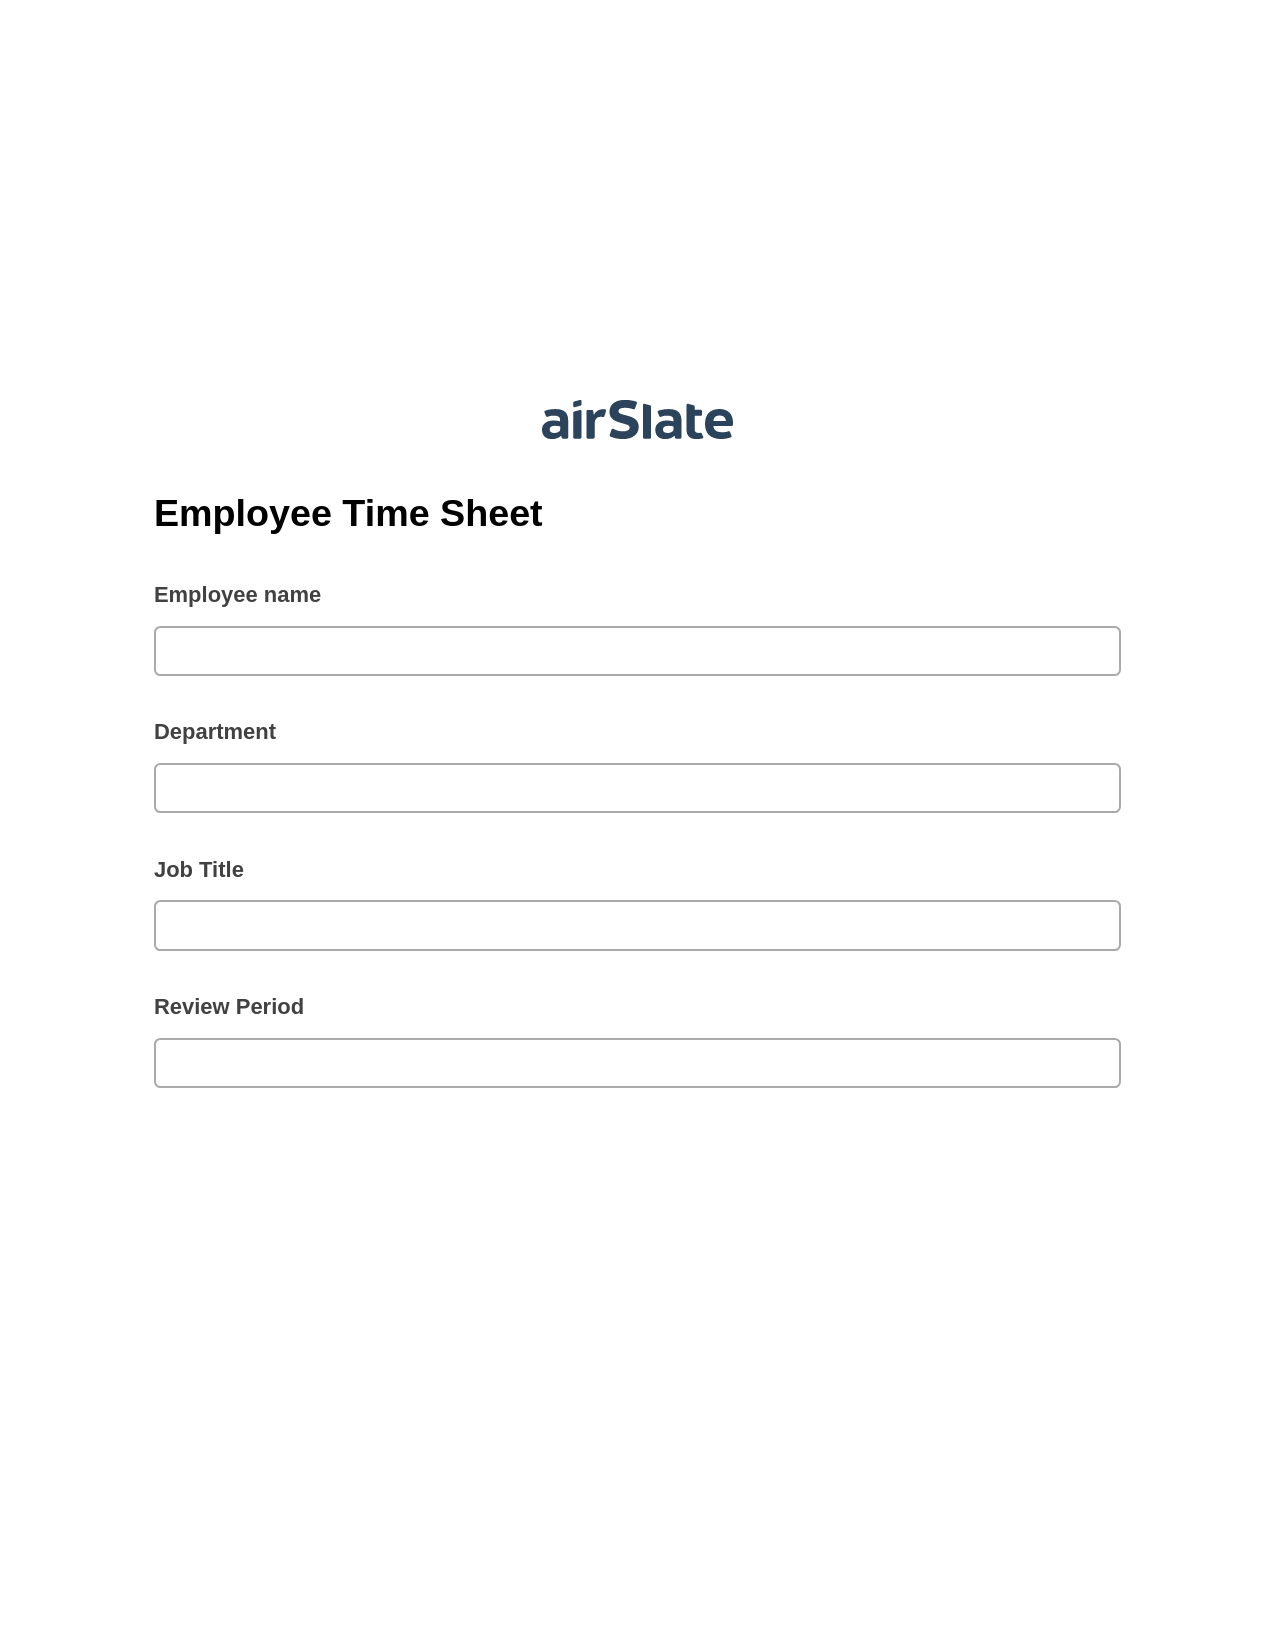 Employee Time Sheet Pre-fill from Excel Spreadsheet Bot, Update Audit Trail Bot, Export to NetSuite Bot